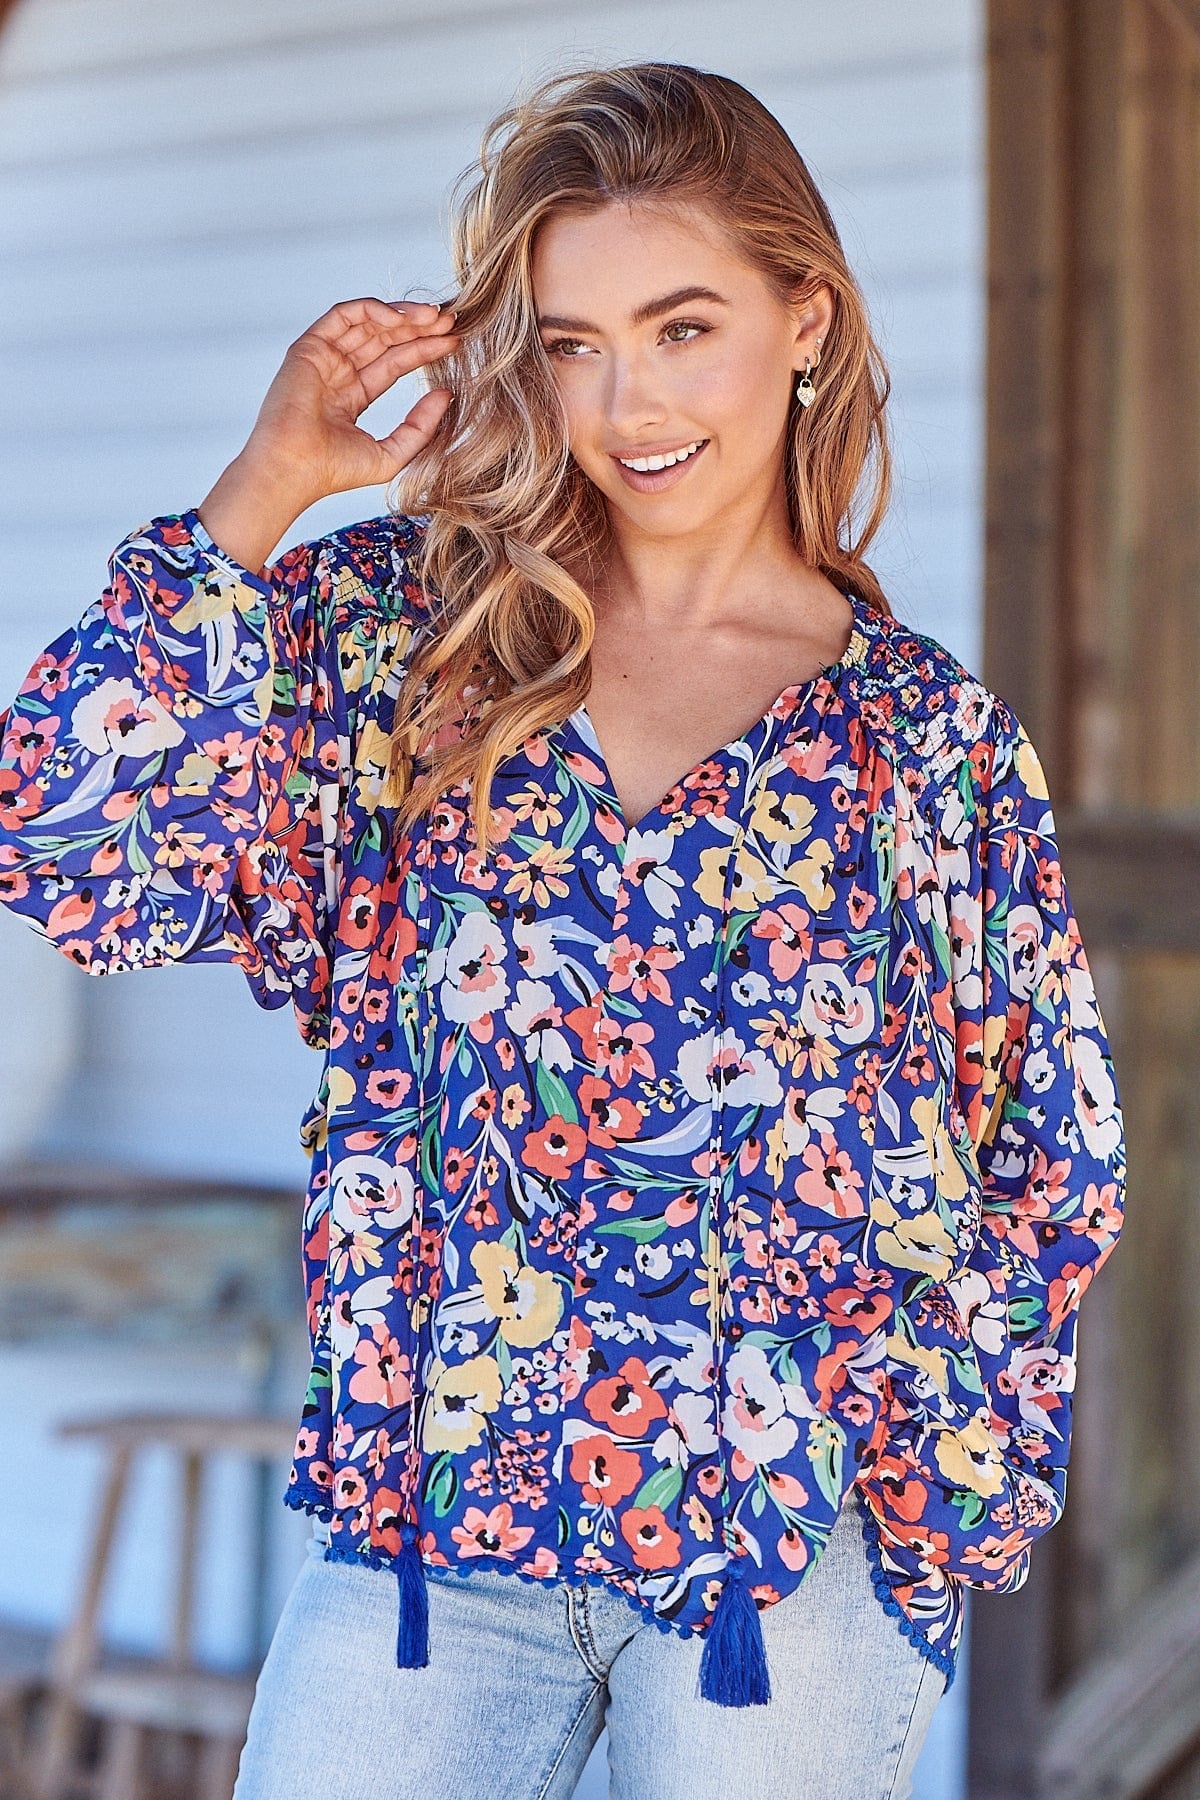 Introducing the Rue Top - Carnation Print. Rock the V-neckline and tassel ties while staying cozy in the oversized, long-sleeve design with cuff. Perfect for adding a touch of fun to any outfit!